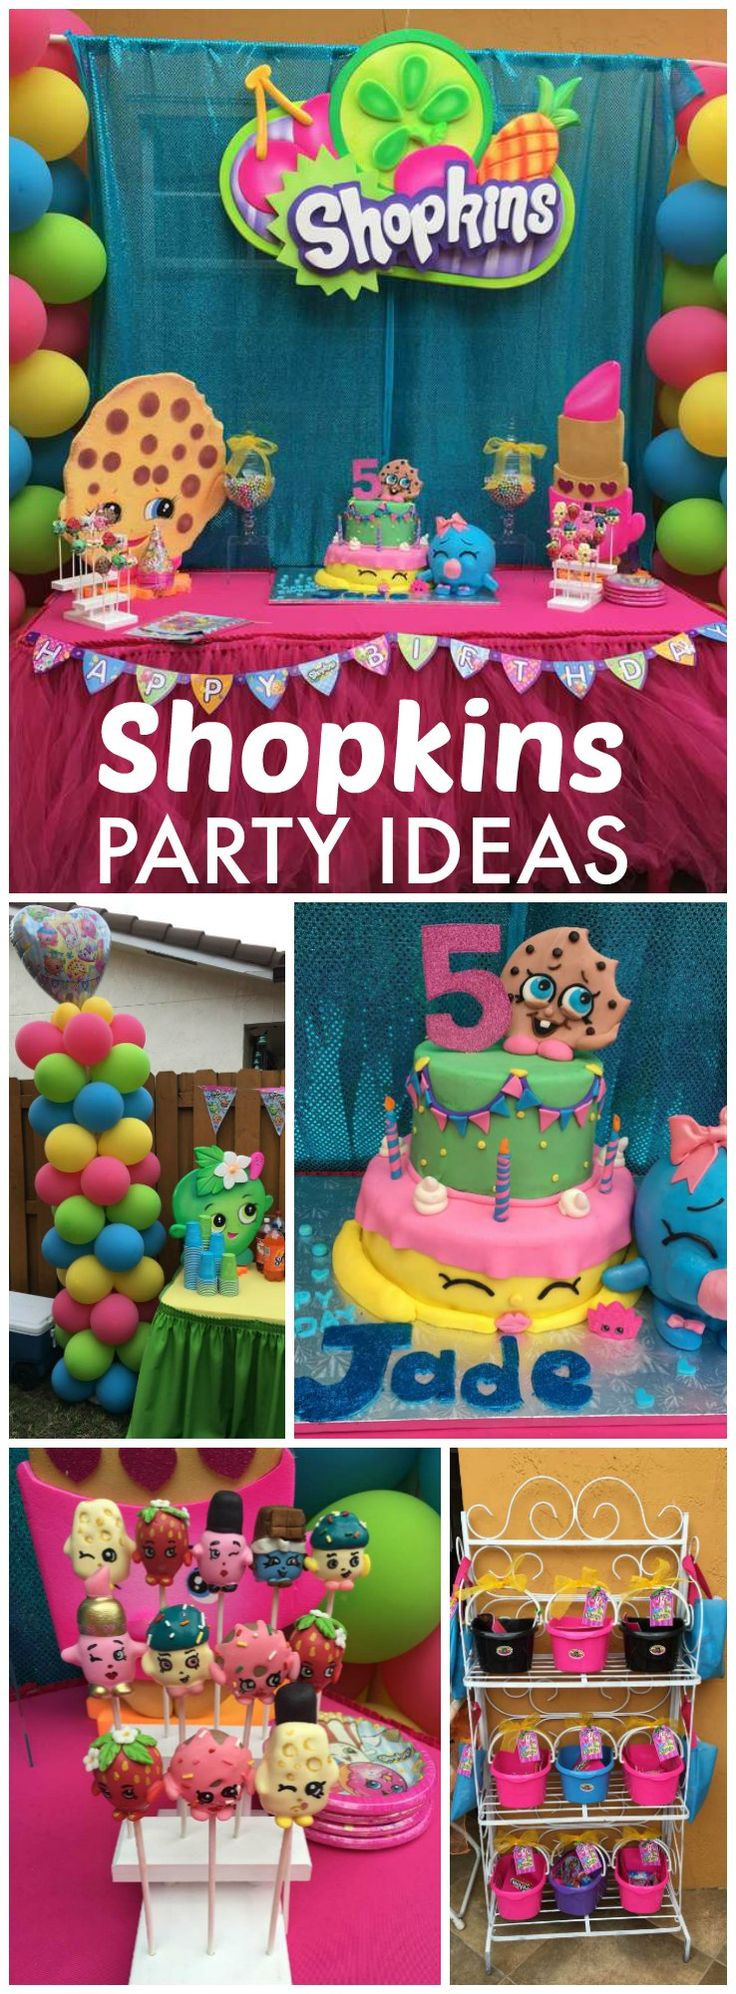 Shopkins Pool Party Ideas
 91 best Shopkins Birthday Party images on Pinterest